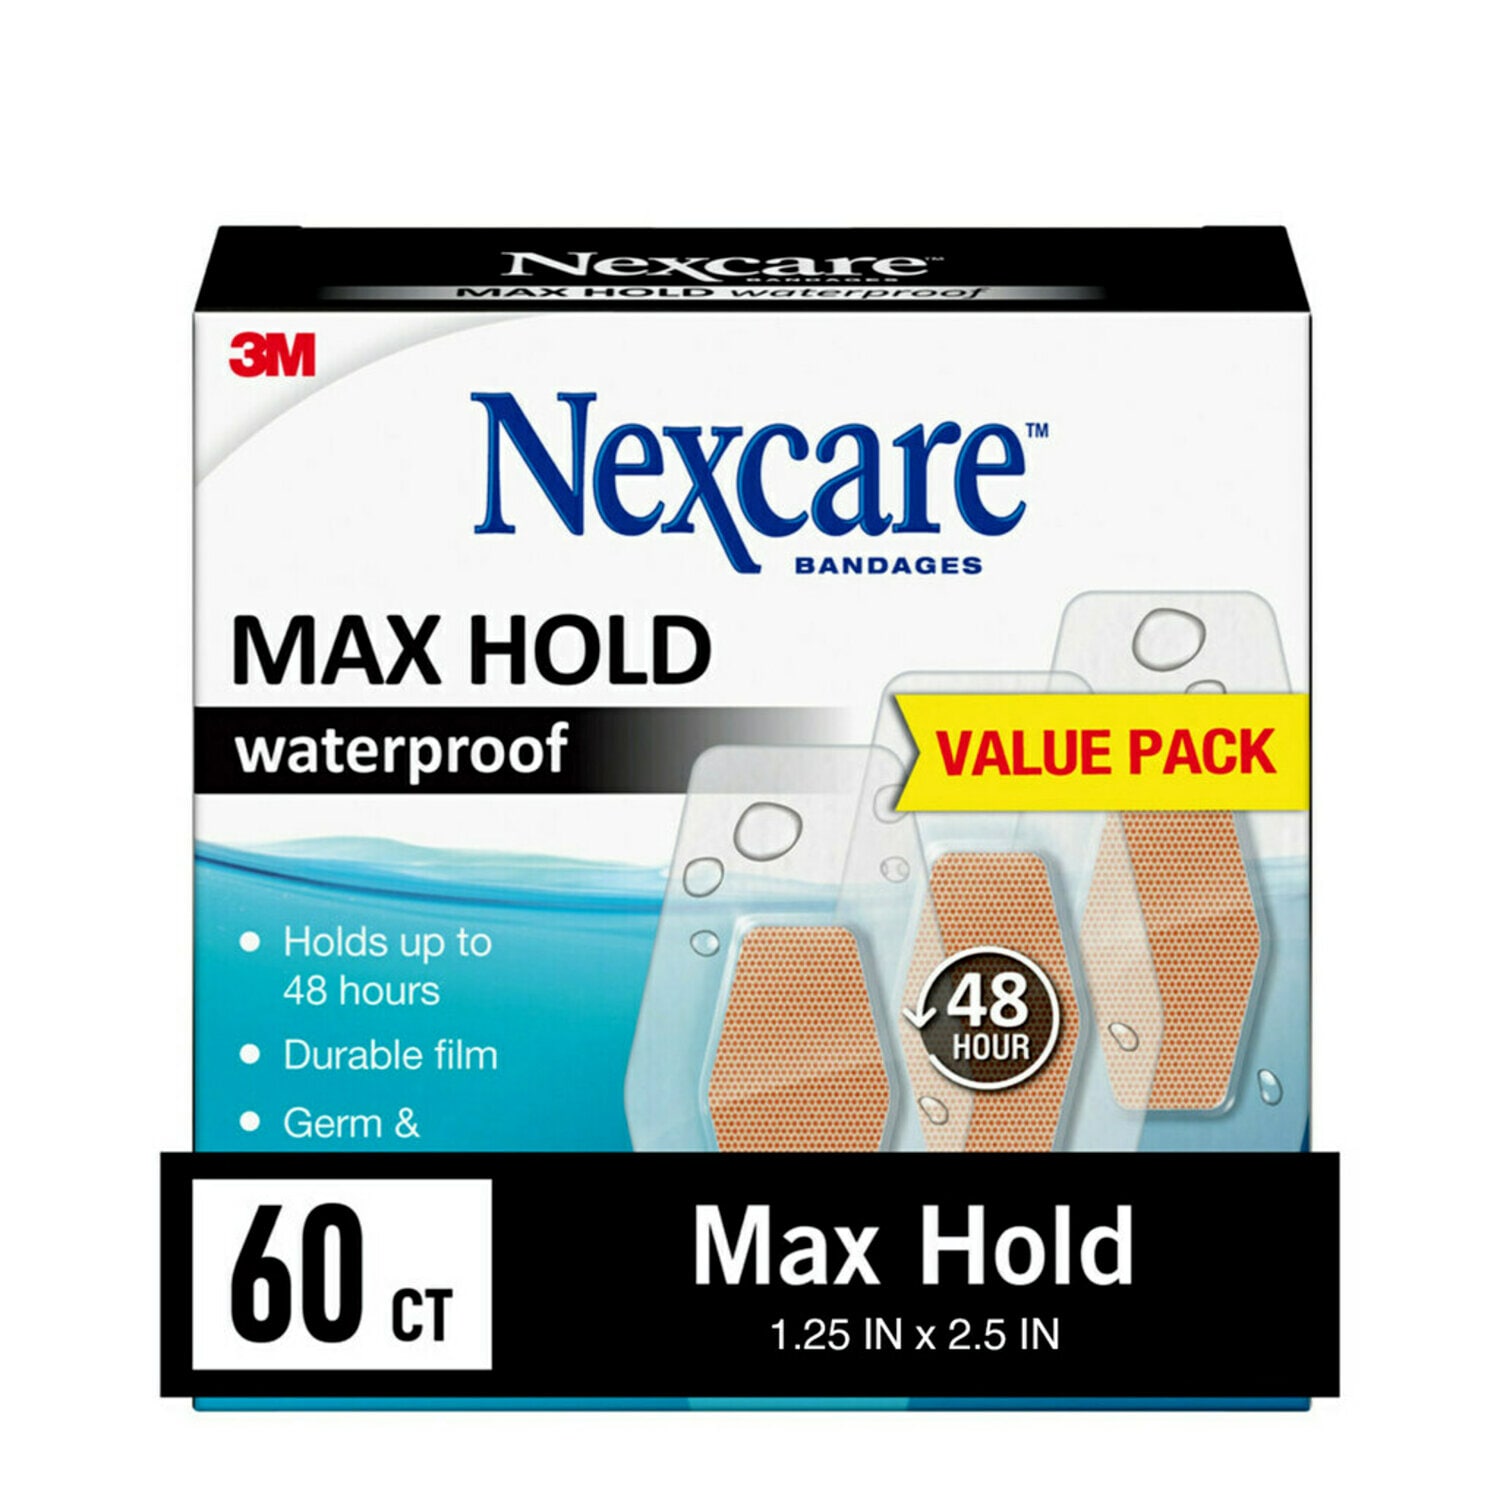 7100215978 - Nexcare Max Hold Waterproof Bandages MHW-60, One Size 60ct 1.25 in x 2.5 in (31 mm x 63 mm)